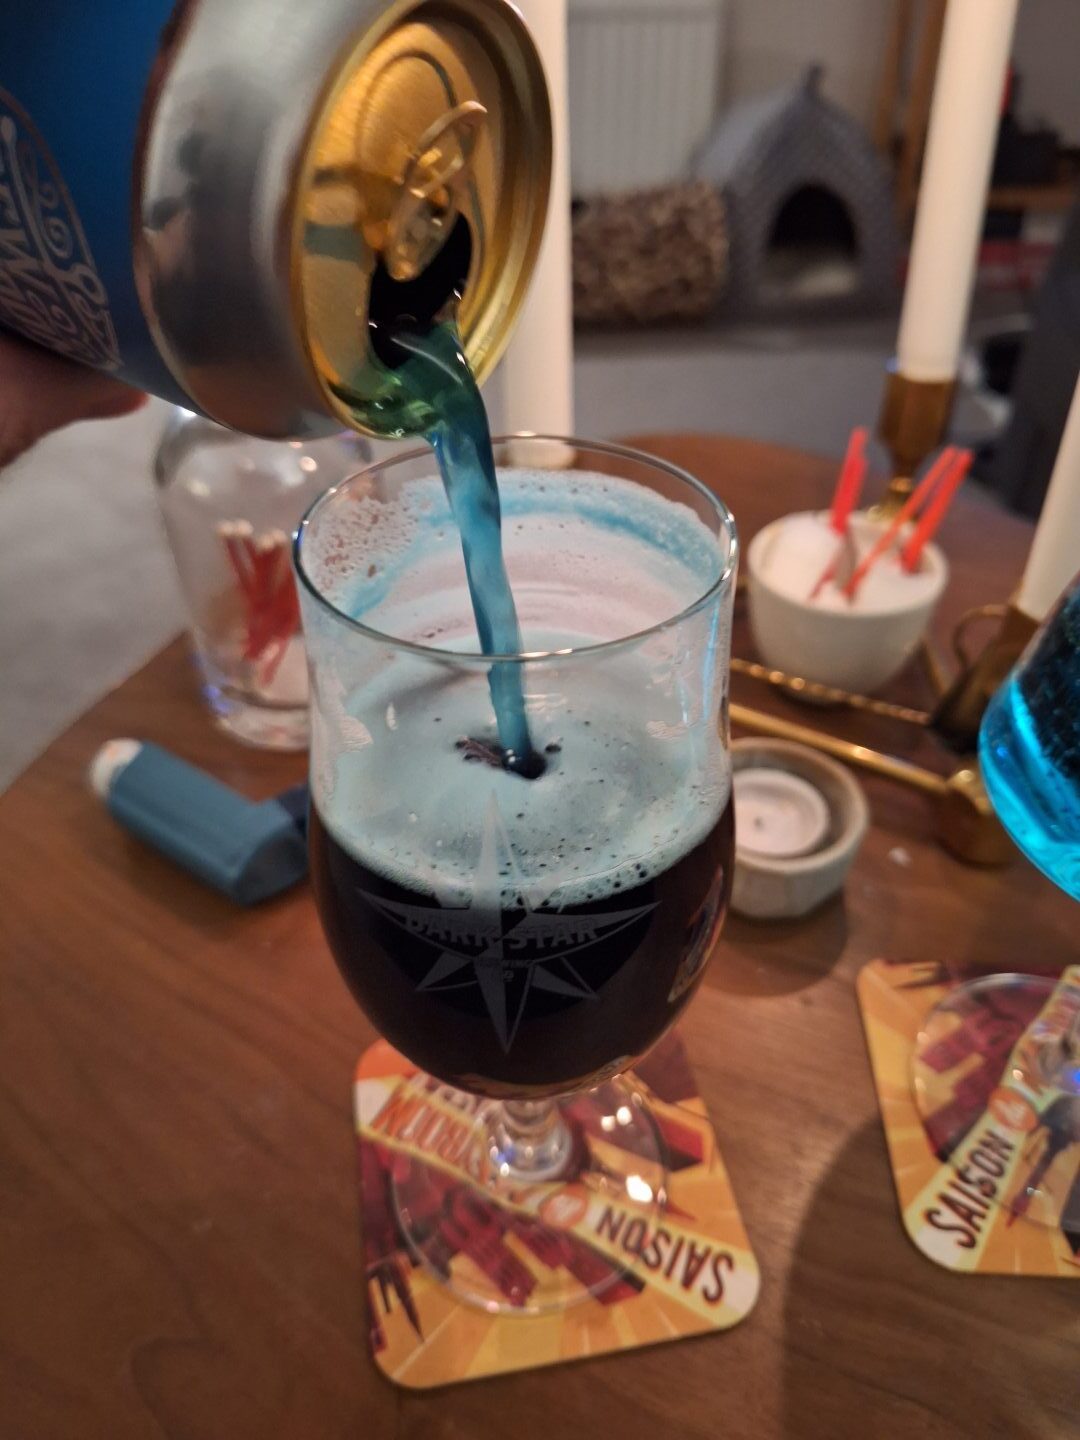 The blue beer being poured into a glass, showing the striking colour mid-flow. 